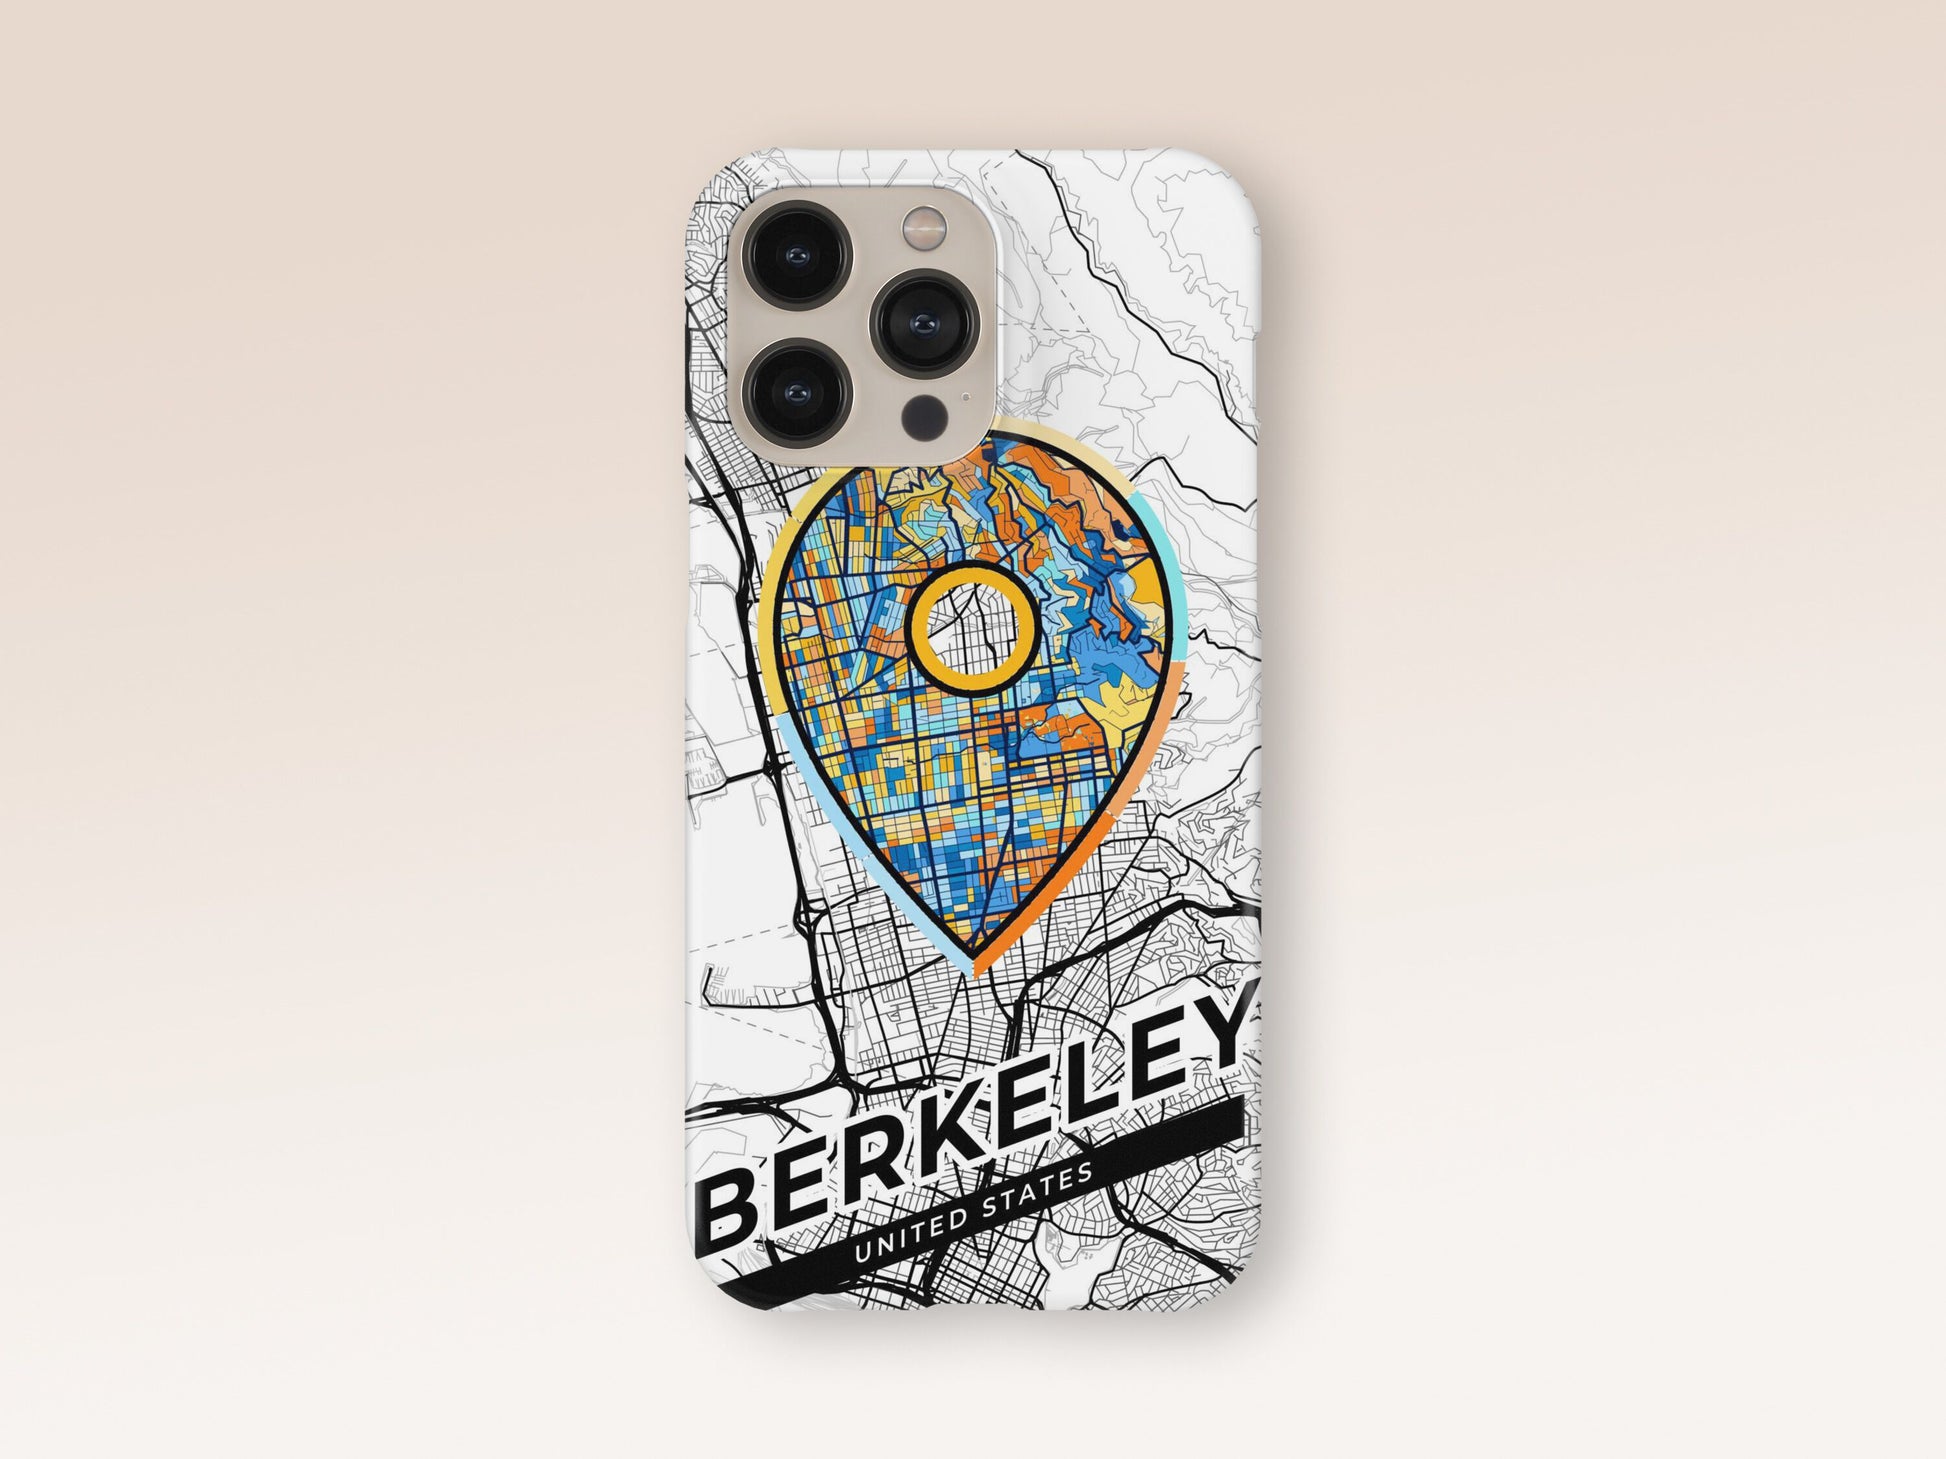 Berkeley California slim phone case with colorful icon. Birthday, wedding or housewarming gift. Couple match cases. 1